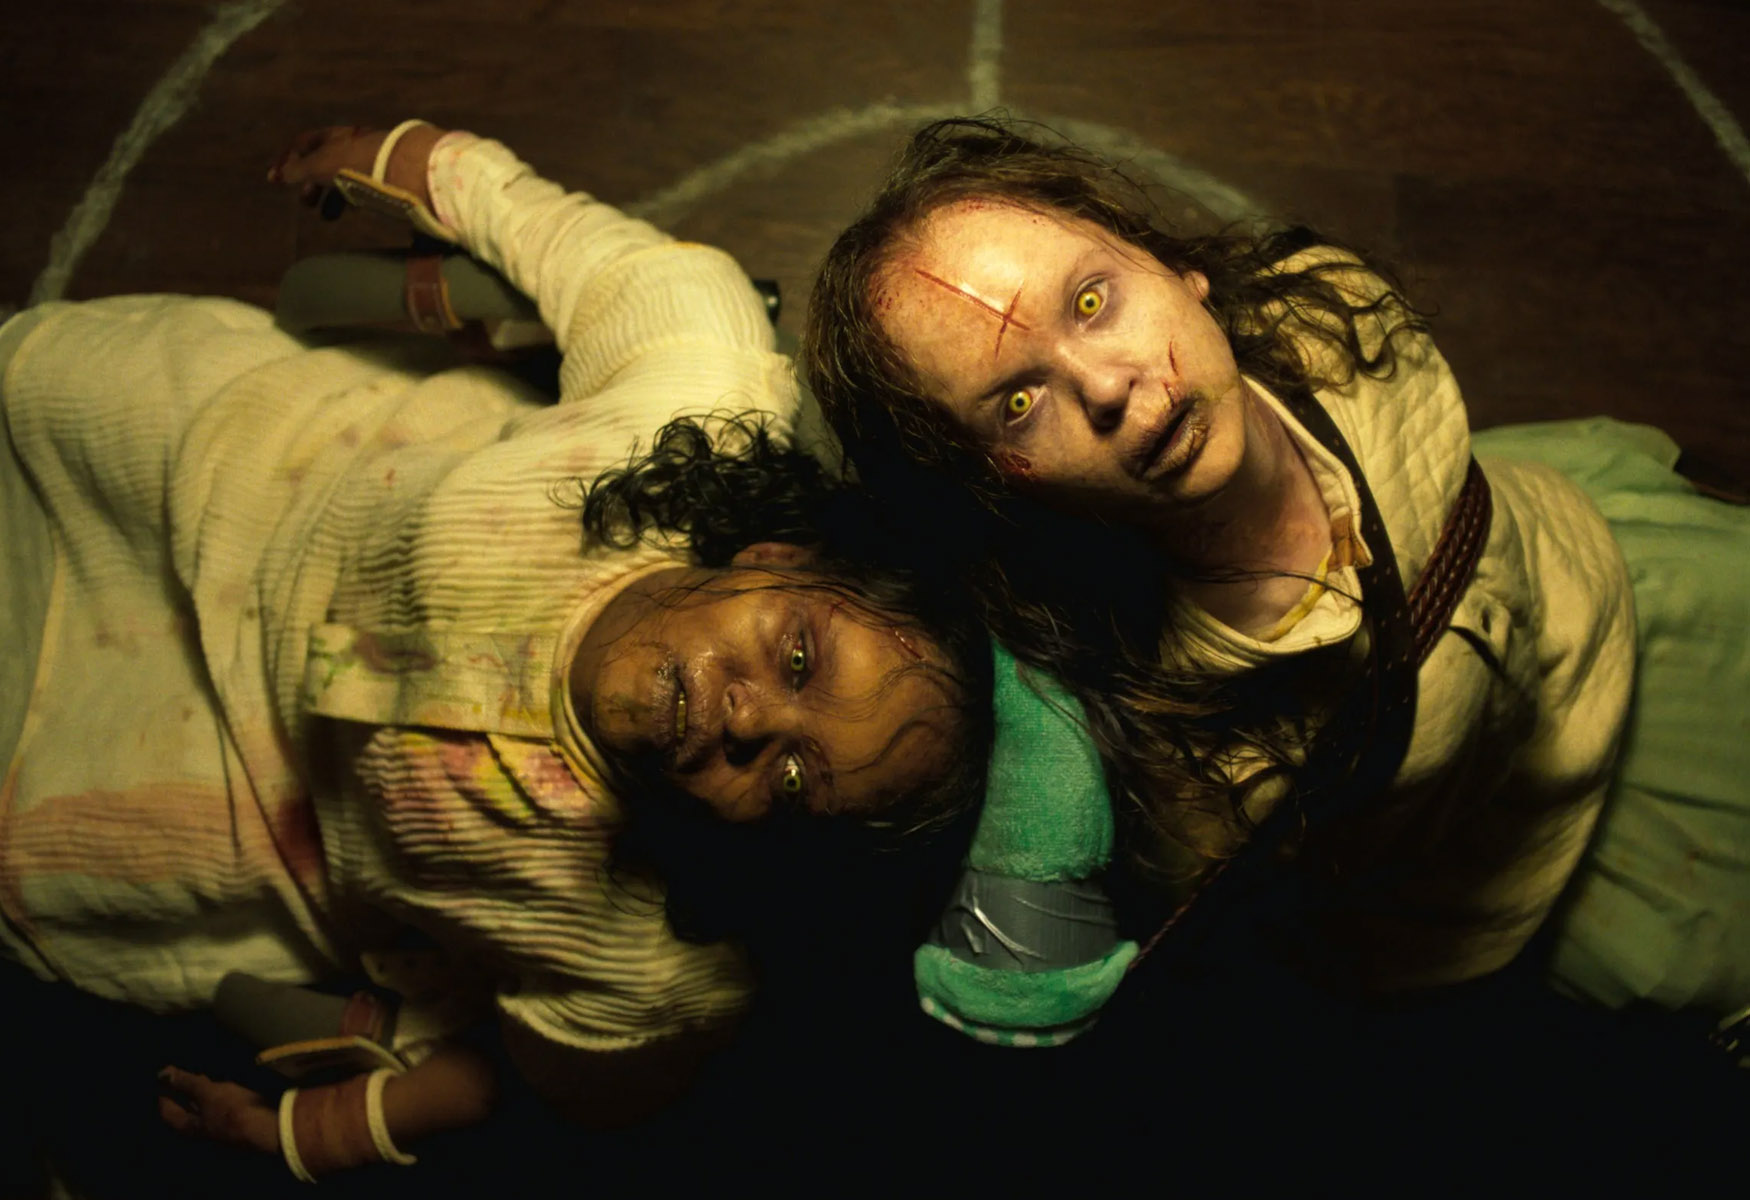 New ‘Exorcist’ Sequel Fails To Make Box Office Waves After Massive Studio Investment